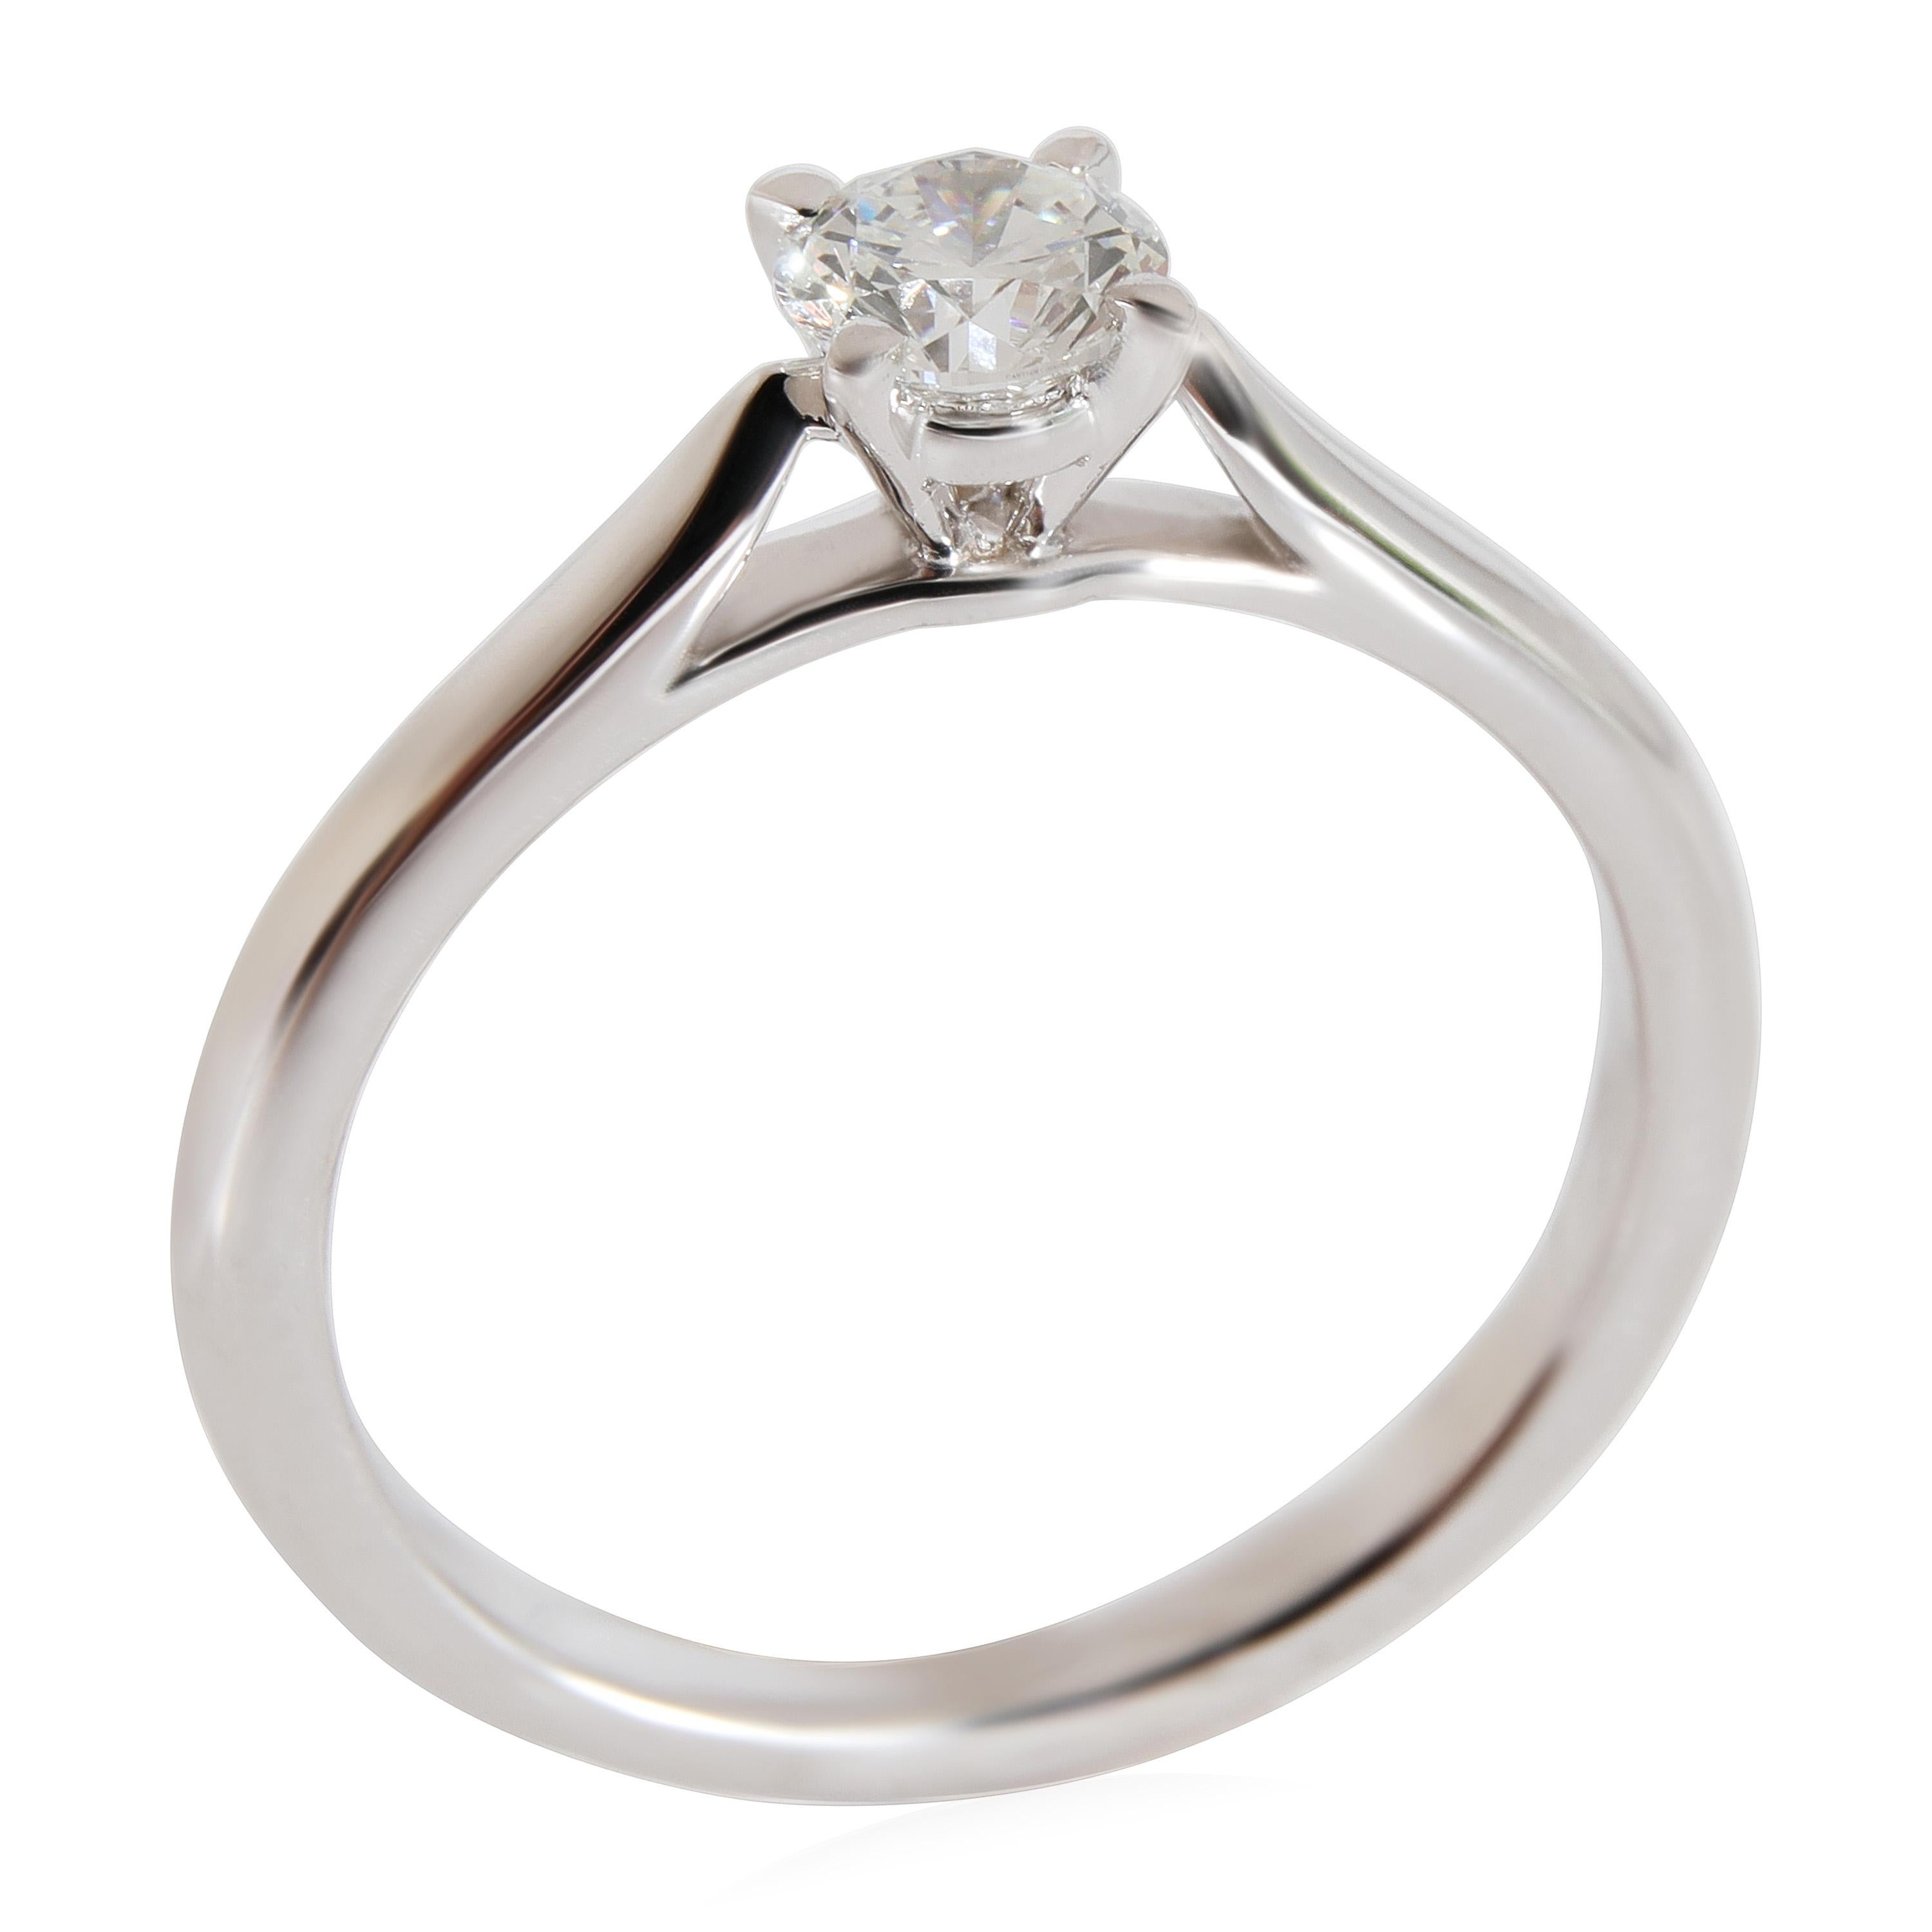 Cartier 1895 Diamond Solitaire Engagement Ring in Platinum G VS1 0.35 CTW

PRIMARY DETAILS
SKU: 121616
Listing Title: Cartier 1895 Diamond Solitaire Engagement Ring in Platinum G VS1 0.35 CTW
Condition Description: Retails for 4350 USD. In excellent